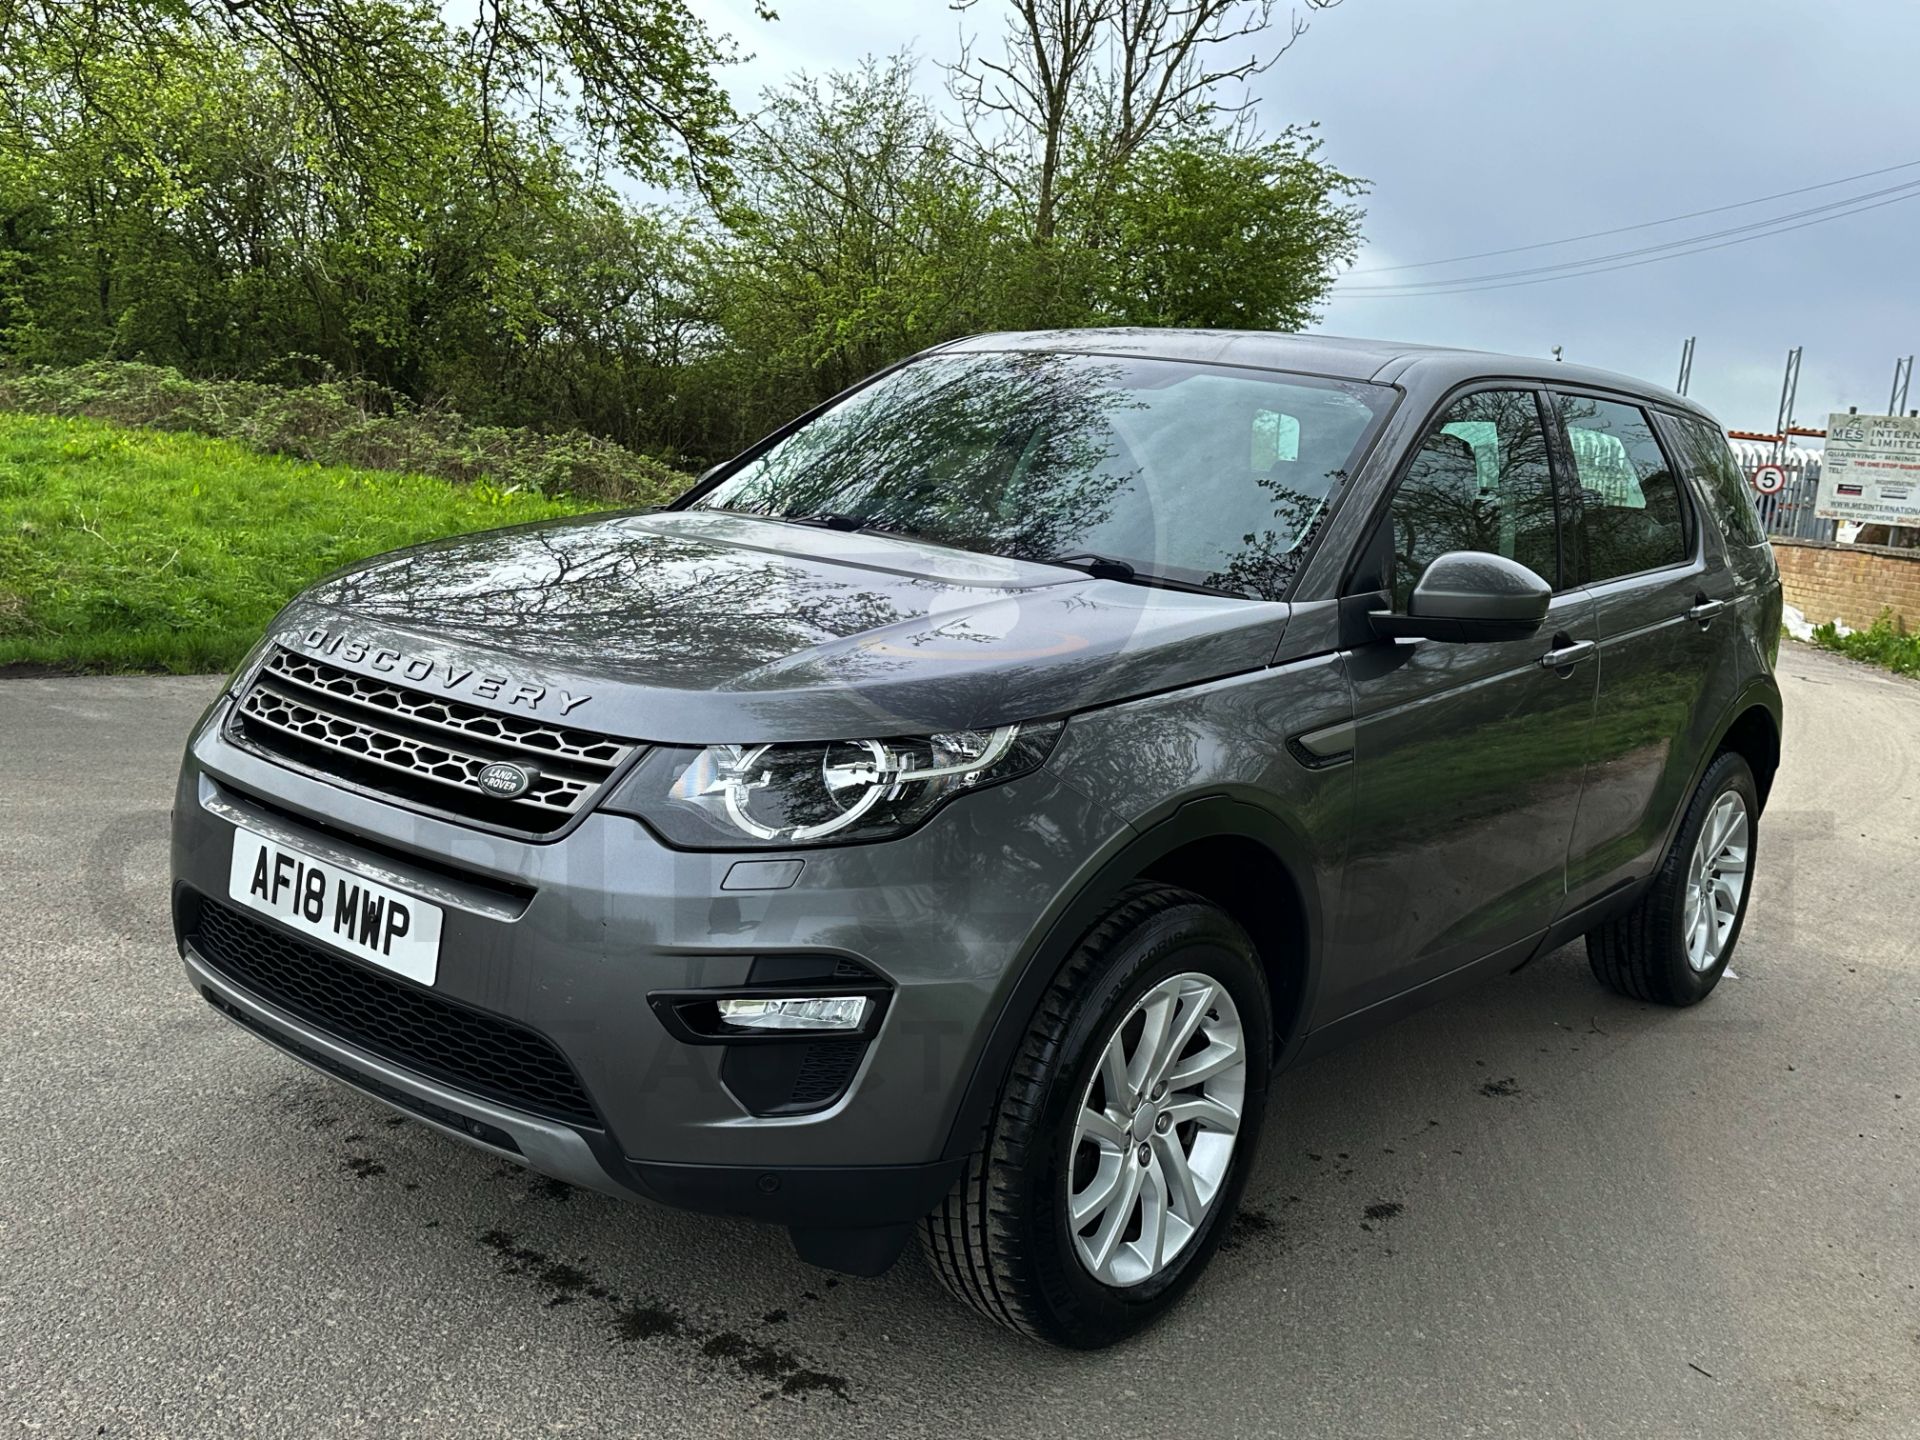 (On Sale) LAND ROVER DISCOVERY SPORT *SE TECH* 5 DOOR SUV (2018 - EURO 6) 2.0 TD4 - AUTO *HUGE SPEC* - Image 5 of 51